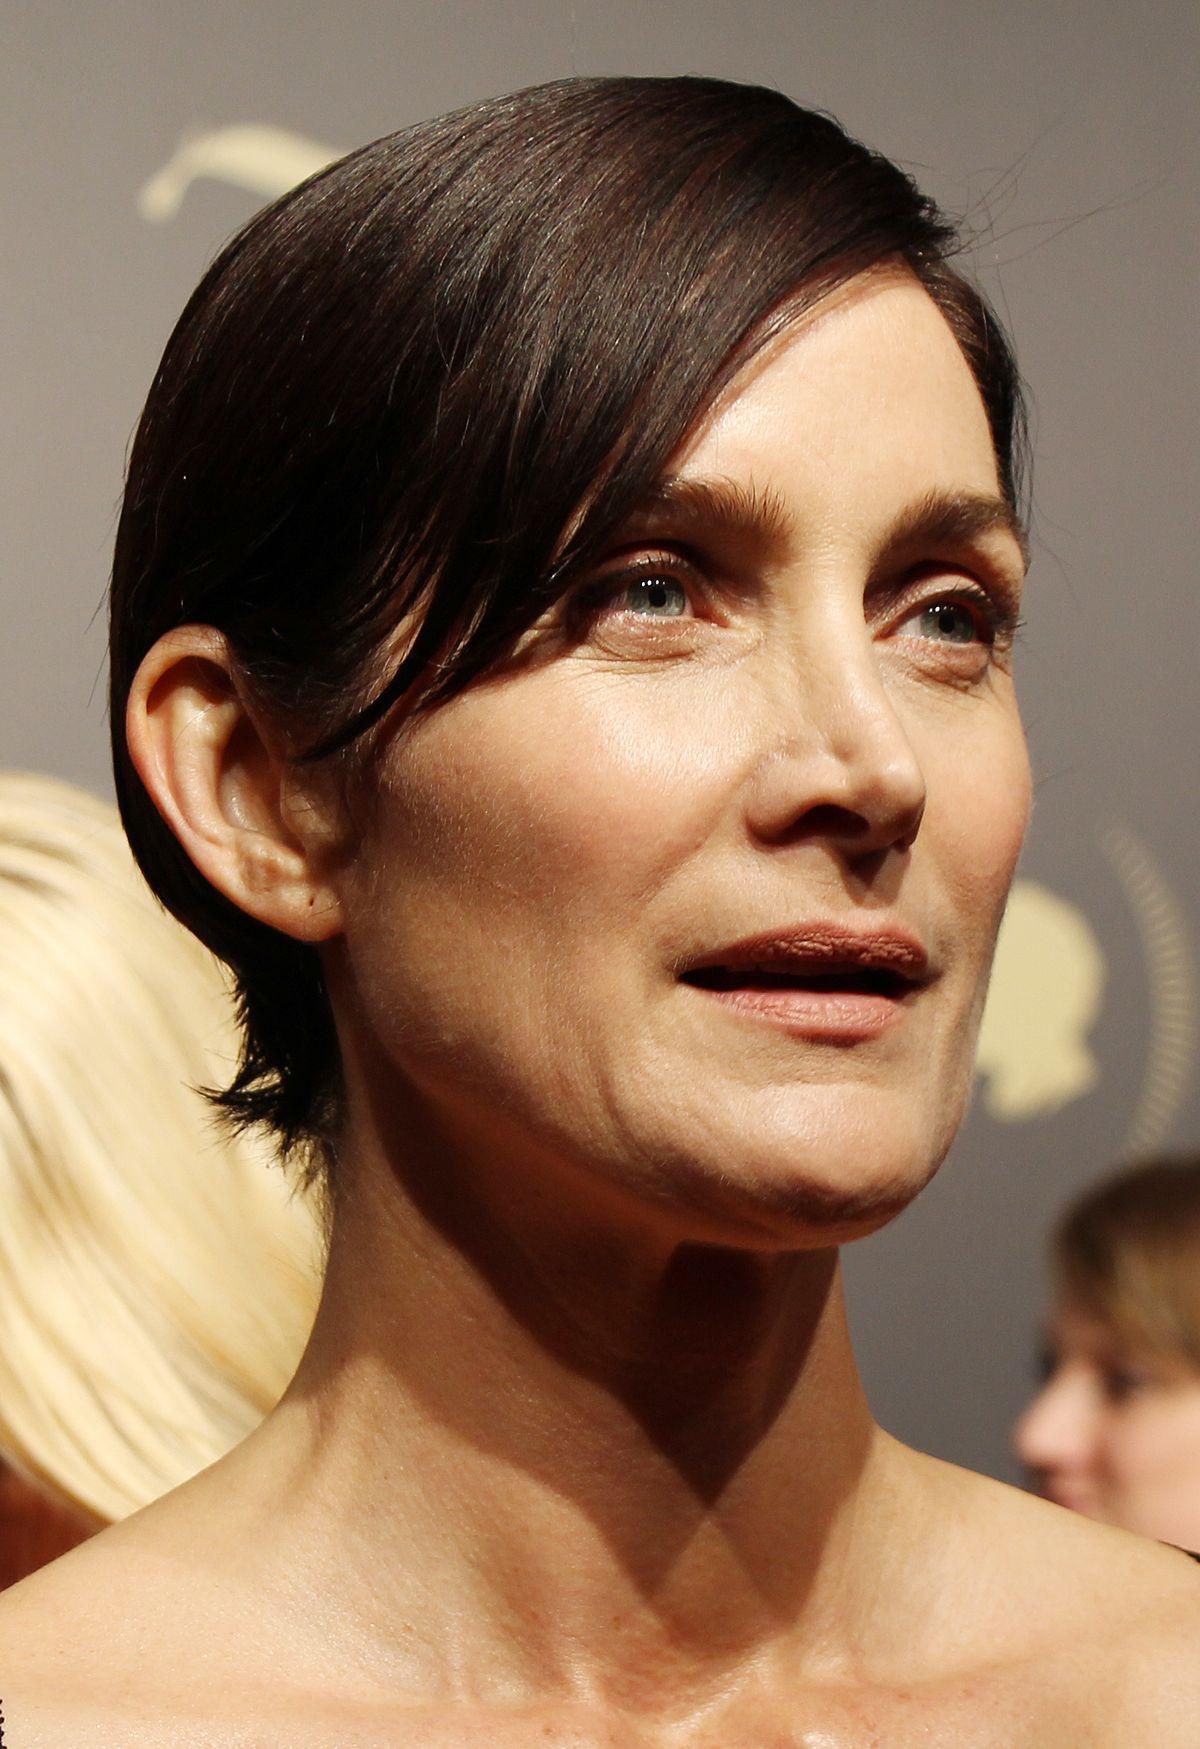 60+ Hottest Carrie-Anne Moss Boobs Pictures Will Make You Fall In Love Like Crazy 184